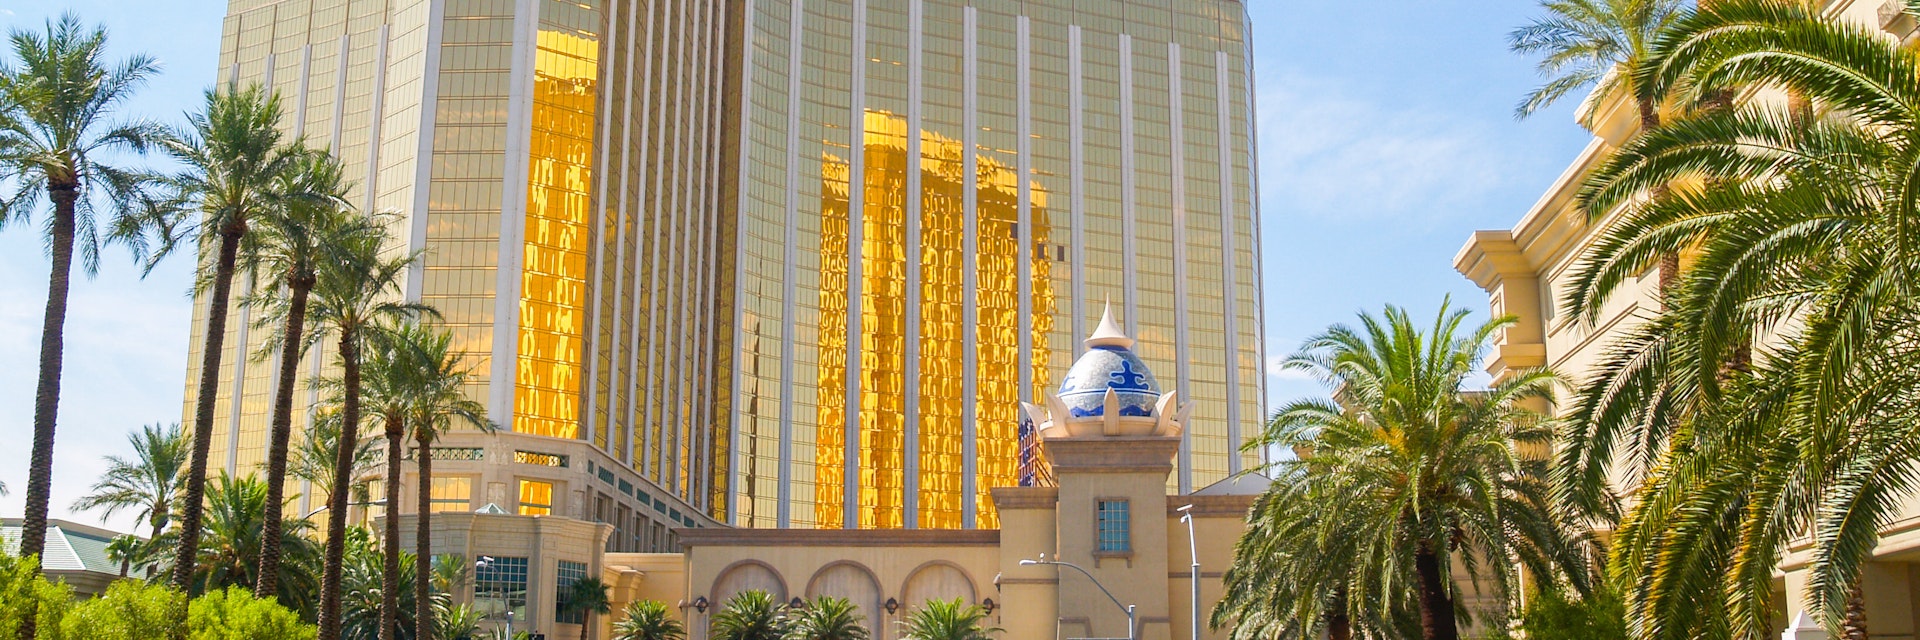 LAS VEGAS, USA AUGUST 14; Enormous Mandalay Bay Hotel Resort and Casino with beautifully landscaped entrance to modern architectural gold glass facade of building August 14, 2008, Las Vegas, USA